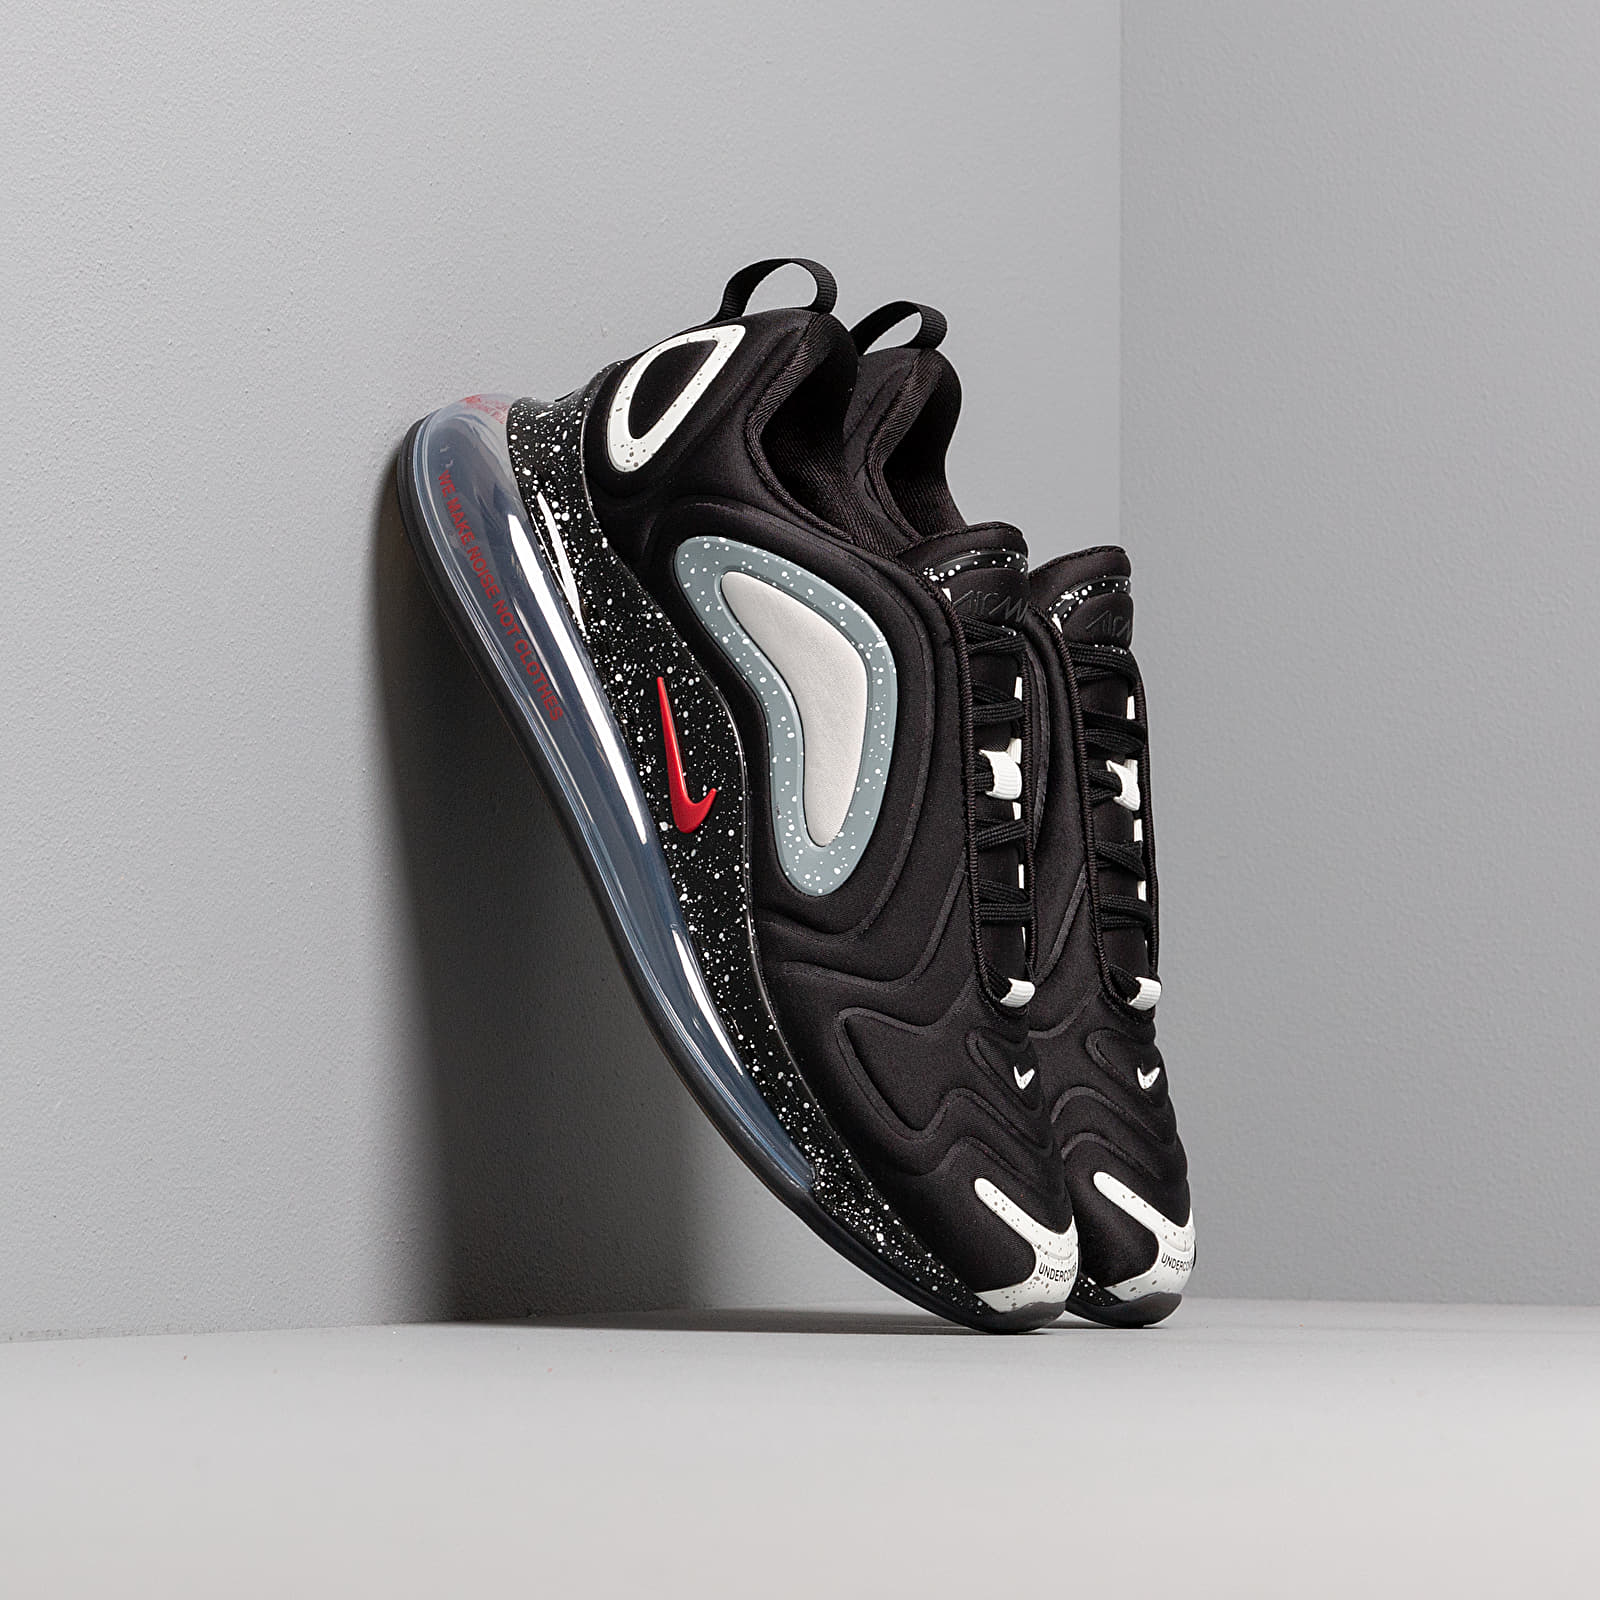 Chaussures et baskets homme Nike x Undercover Air Max 720 Black/ University Red